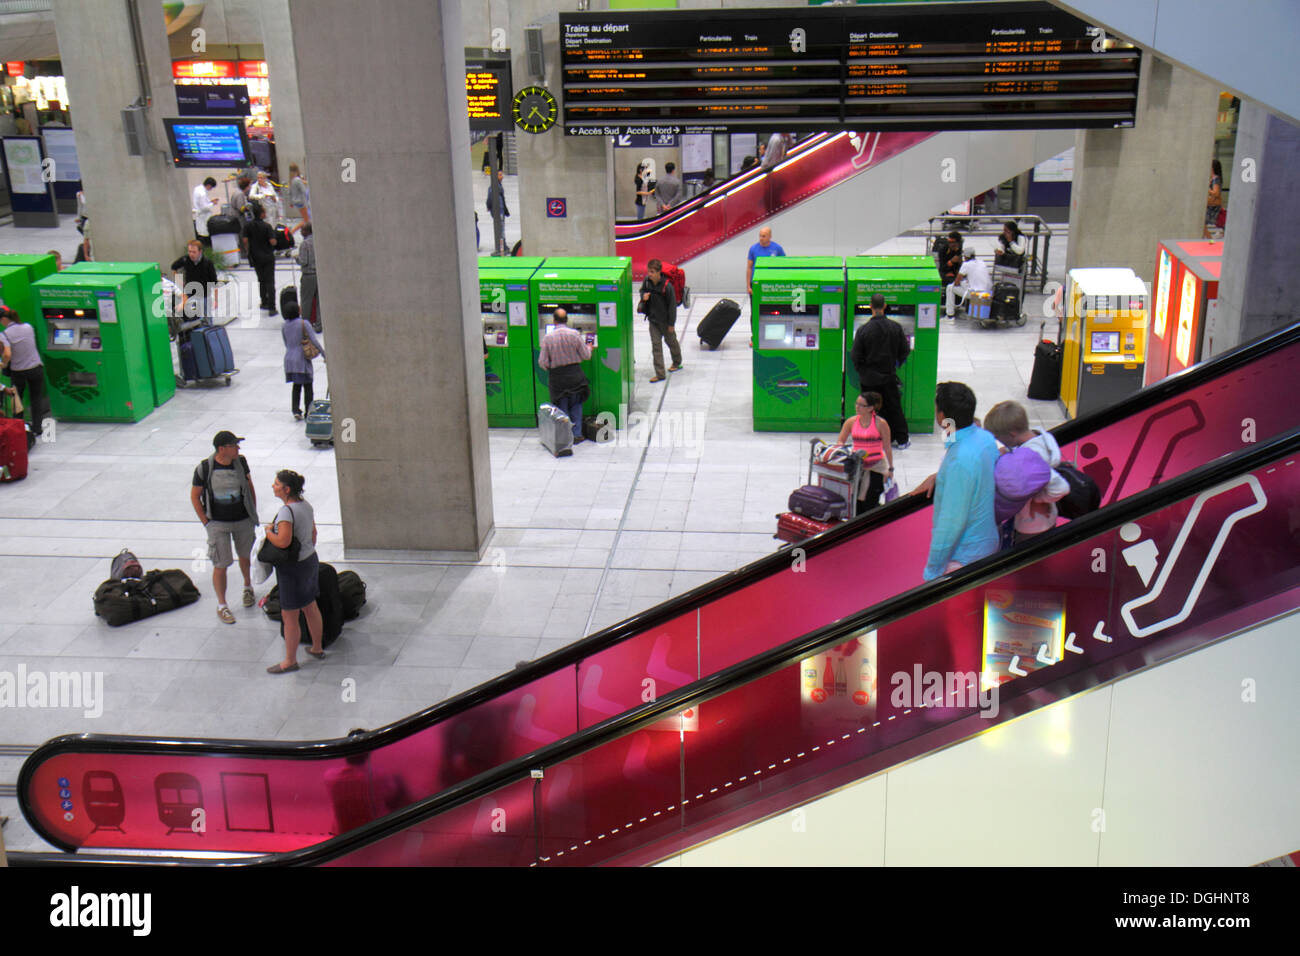 Paris France,CDG,Charles de Gaulle Airport,ticket  office,train,RER,Metro,SNCF,RATP,green,vending machines,self  service,France130822004 Stock Photo - Alamy